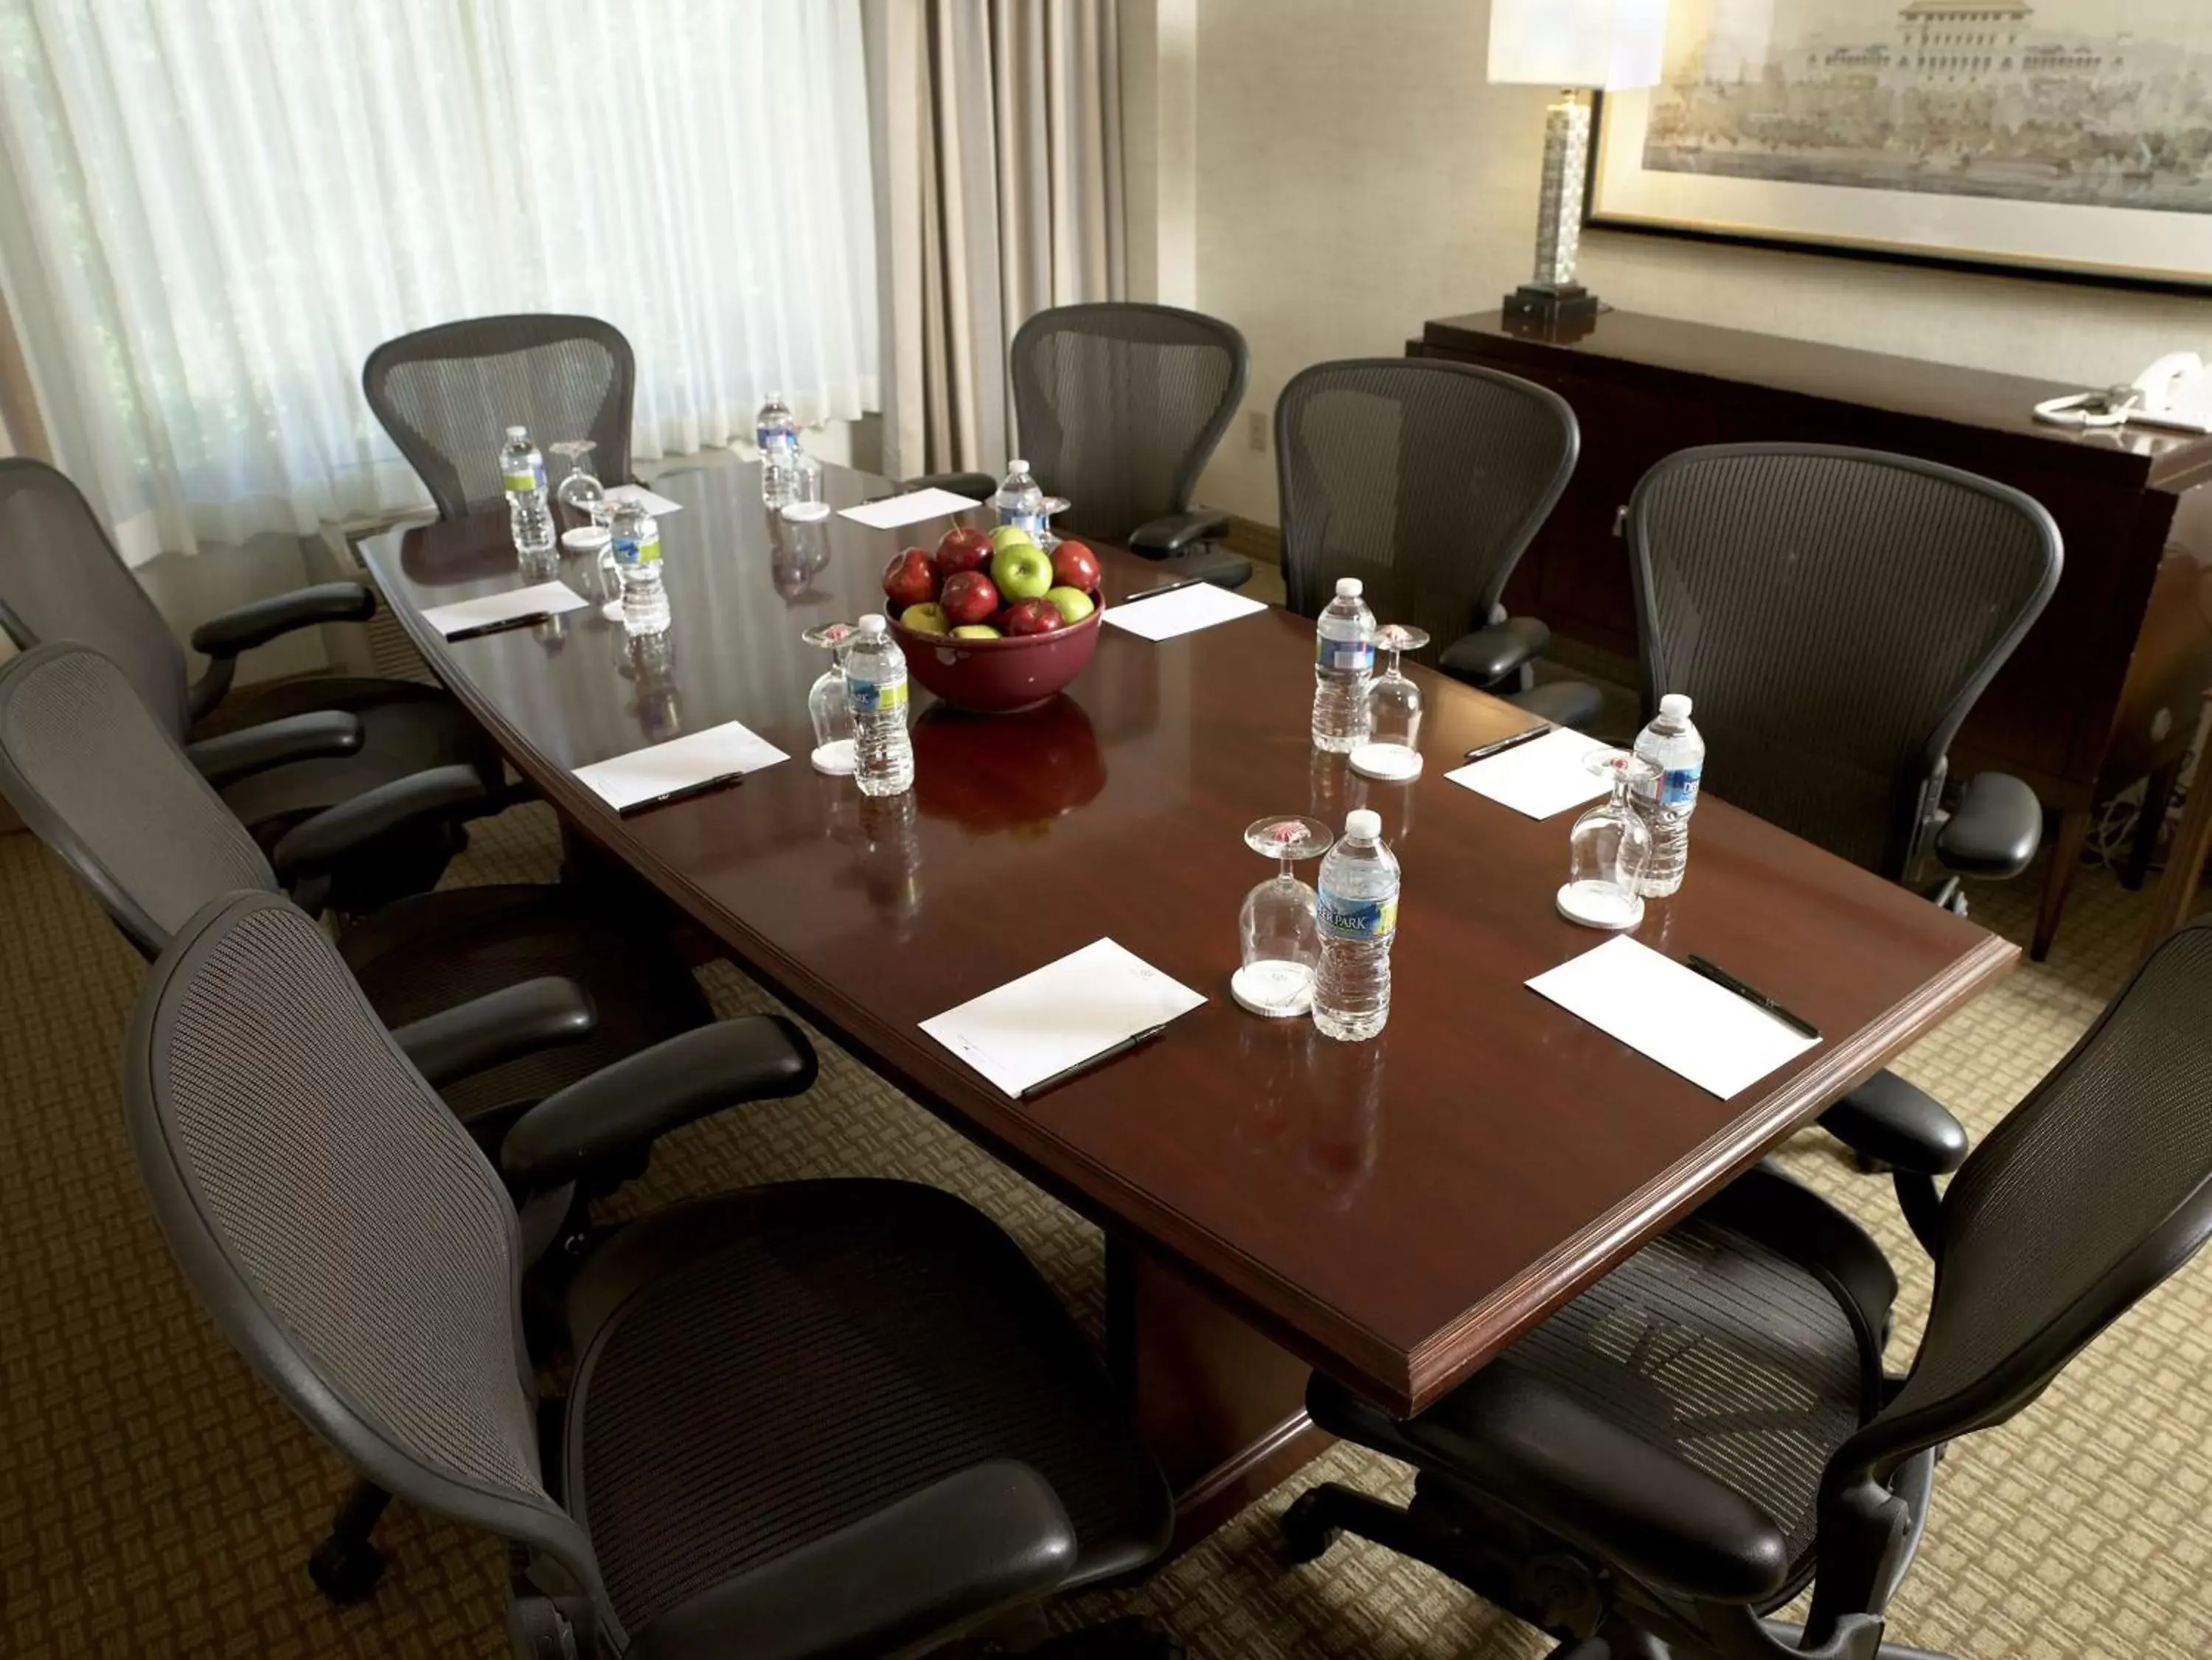 Meeting/conference room, Business Area/Conference Room in DoubleTree by Hilton Charlotte Airport